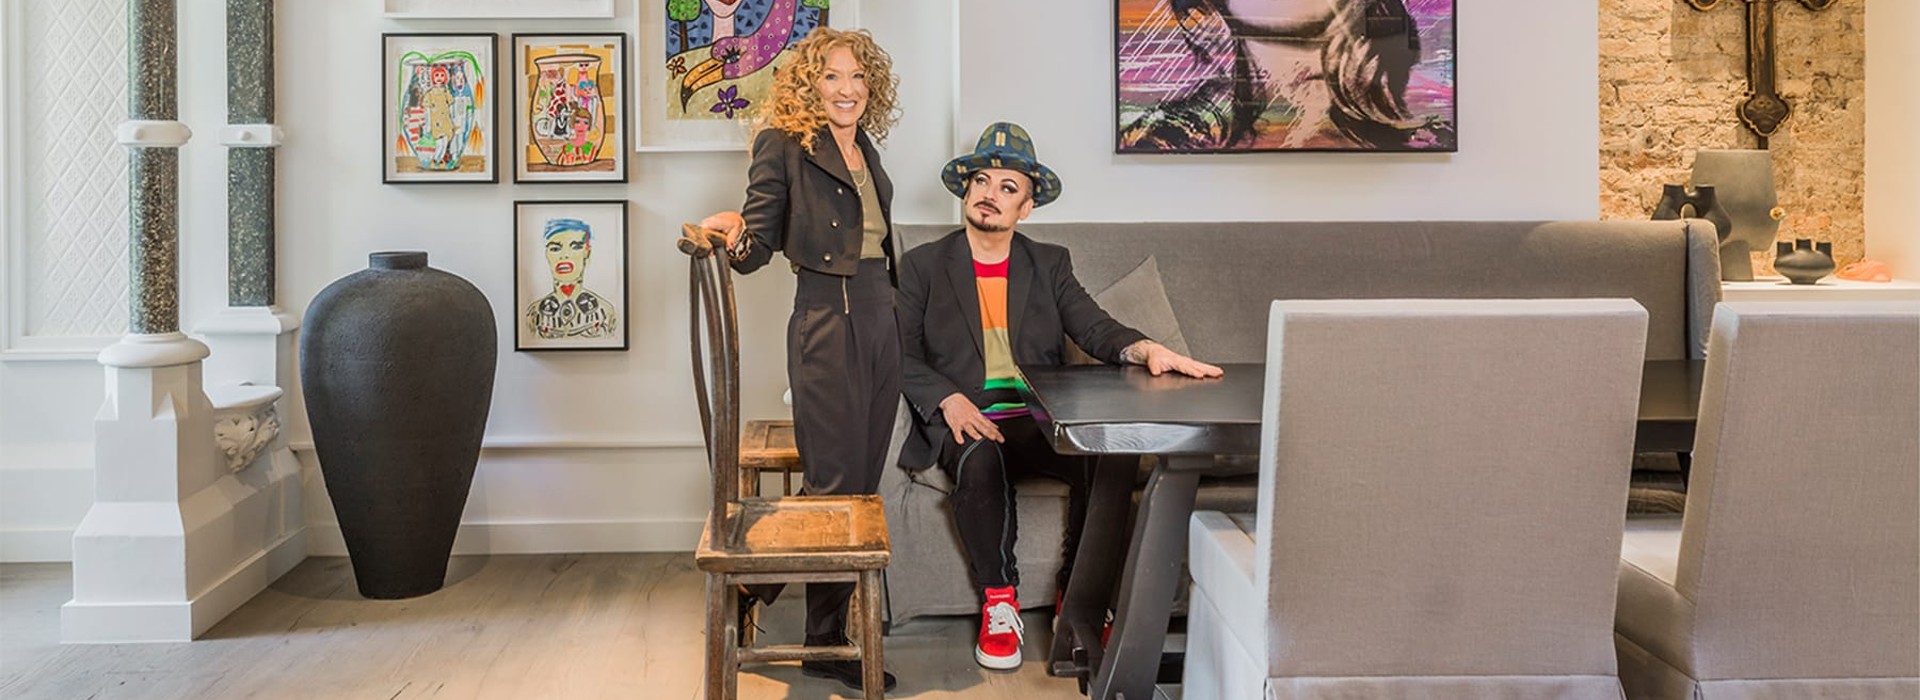 Boy George's London Home by Kelly Hoppen - Modern Neutrals and Striking Artwork ft